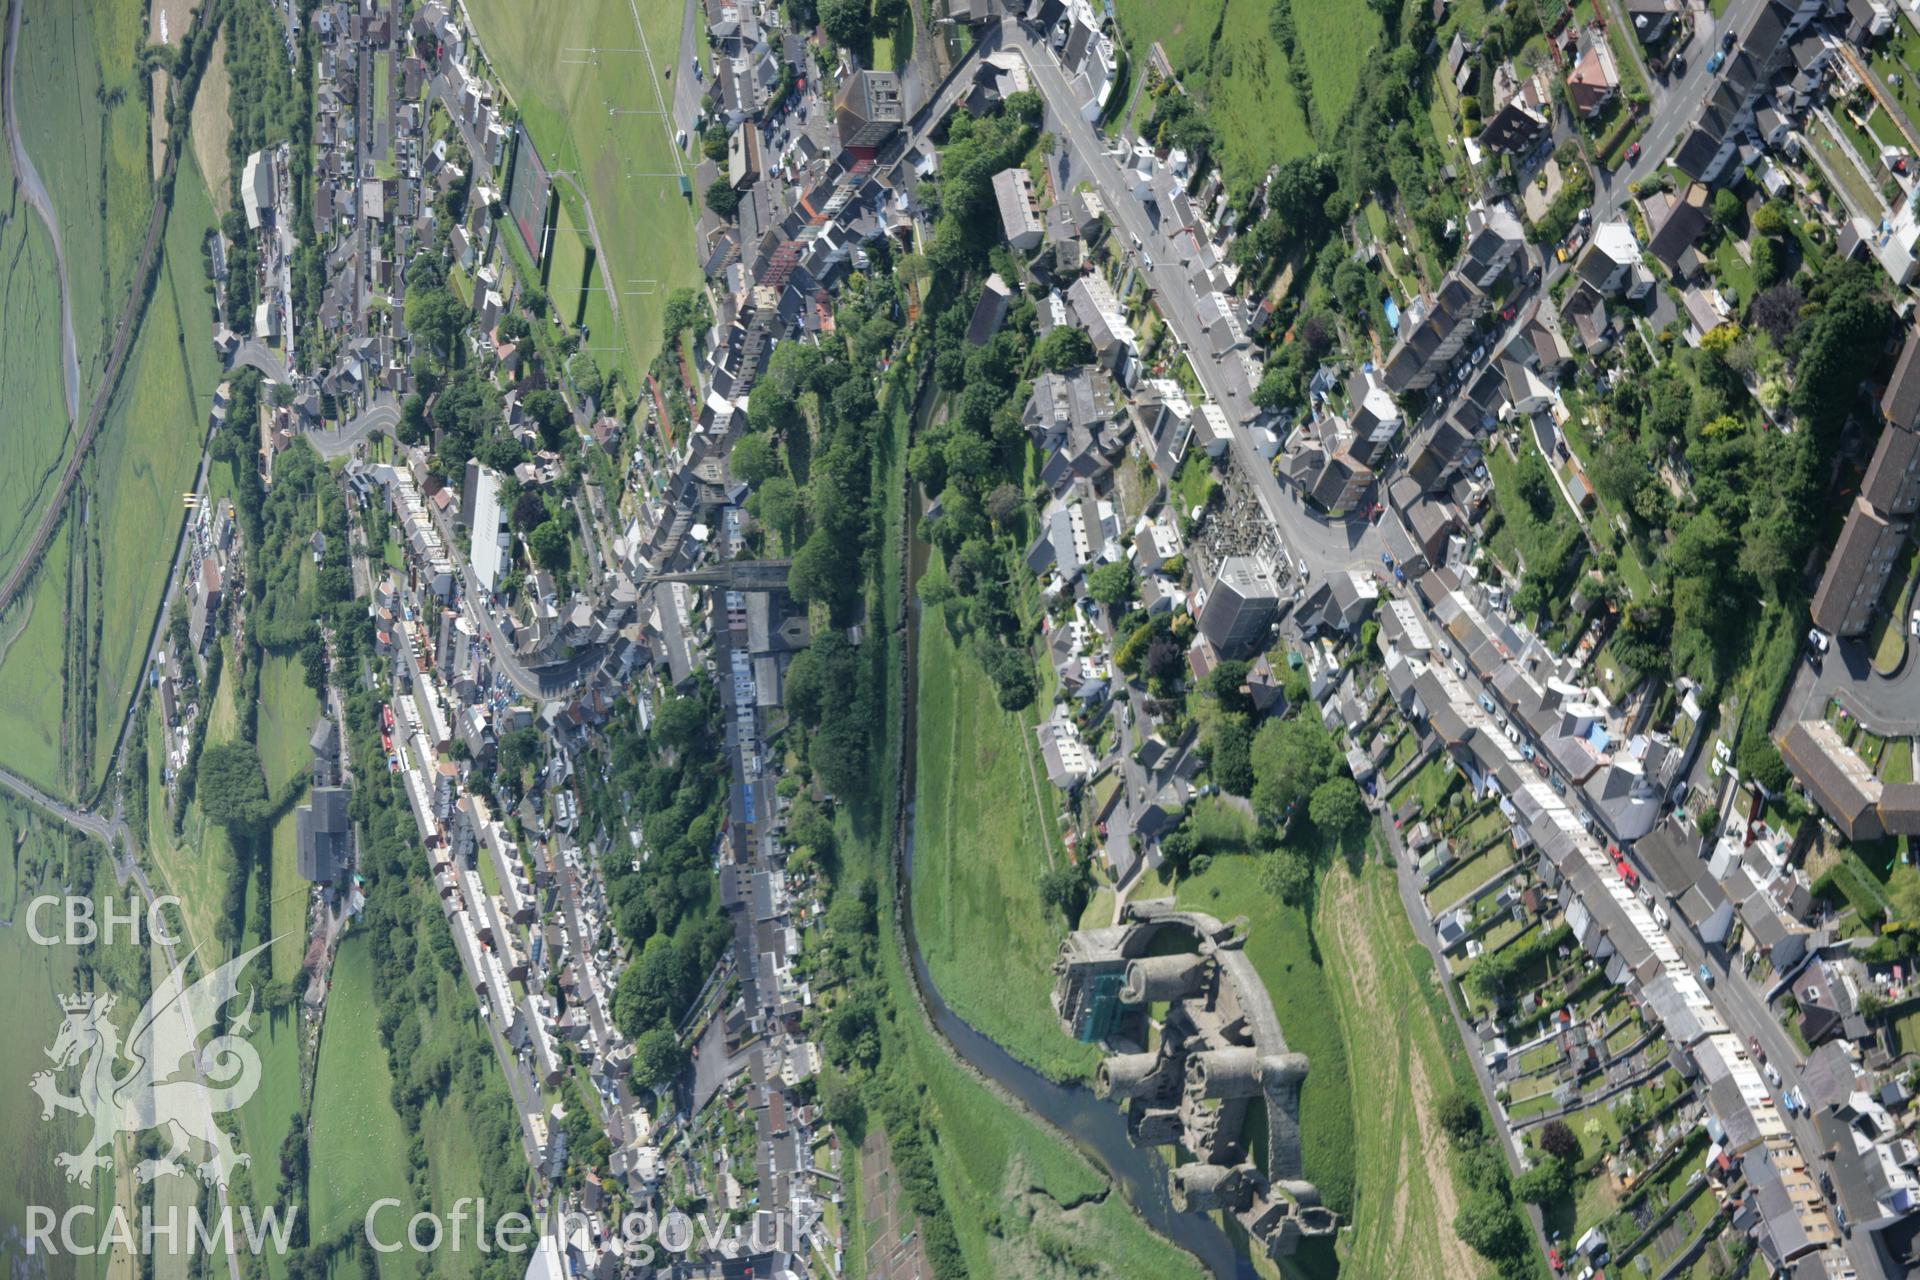 RCAHMW colour oblique aerial photograph of Kidwelly Castle and town, shown with wide view from the north-west Taken on 09 June 2005 by Toby Driver